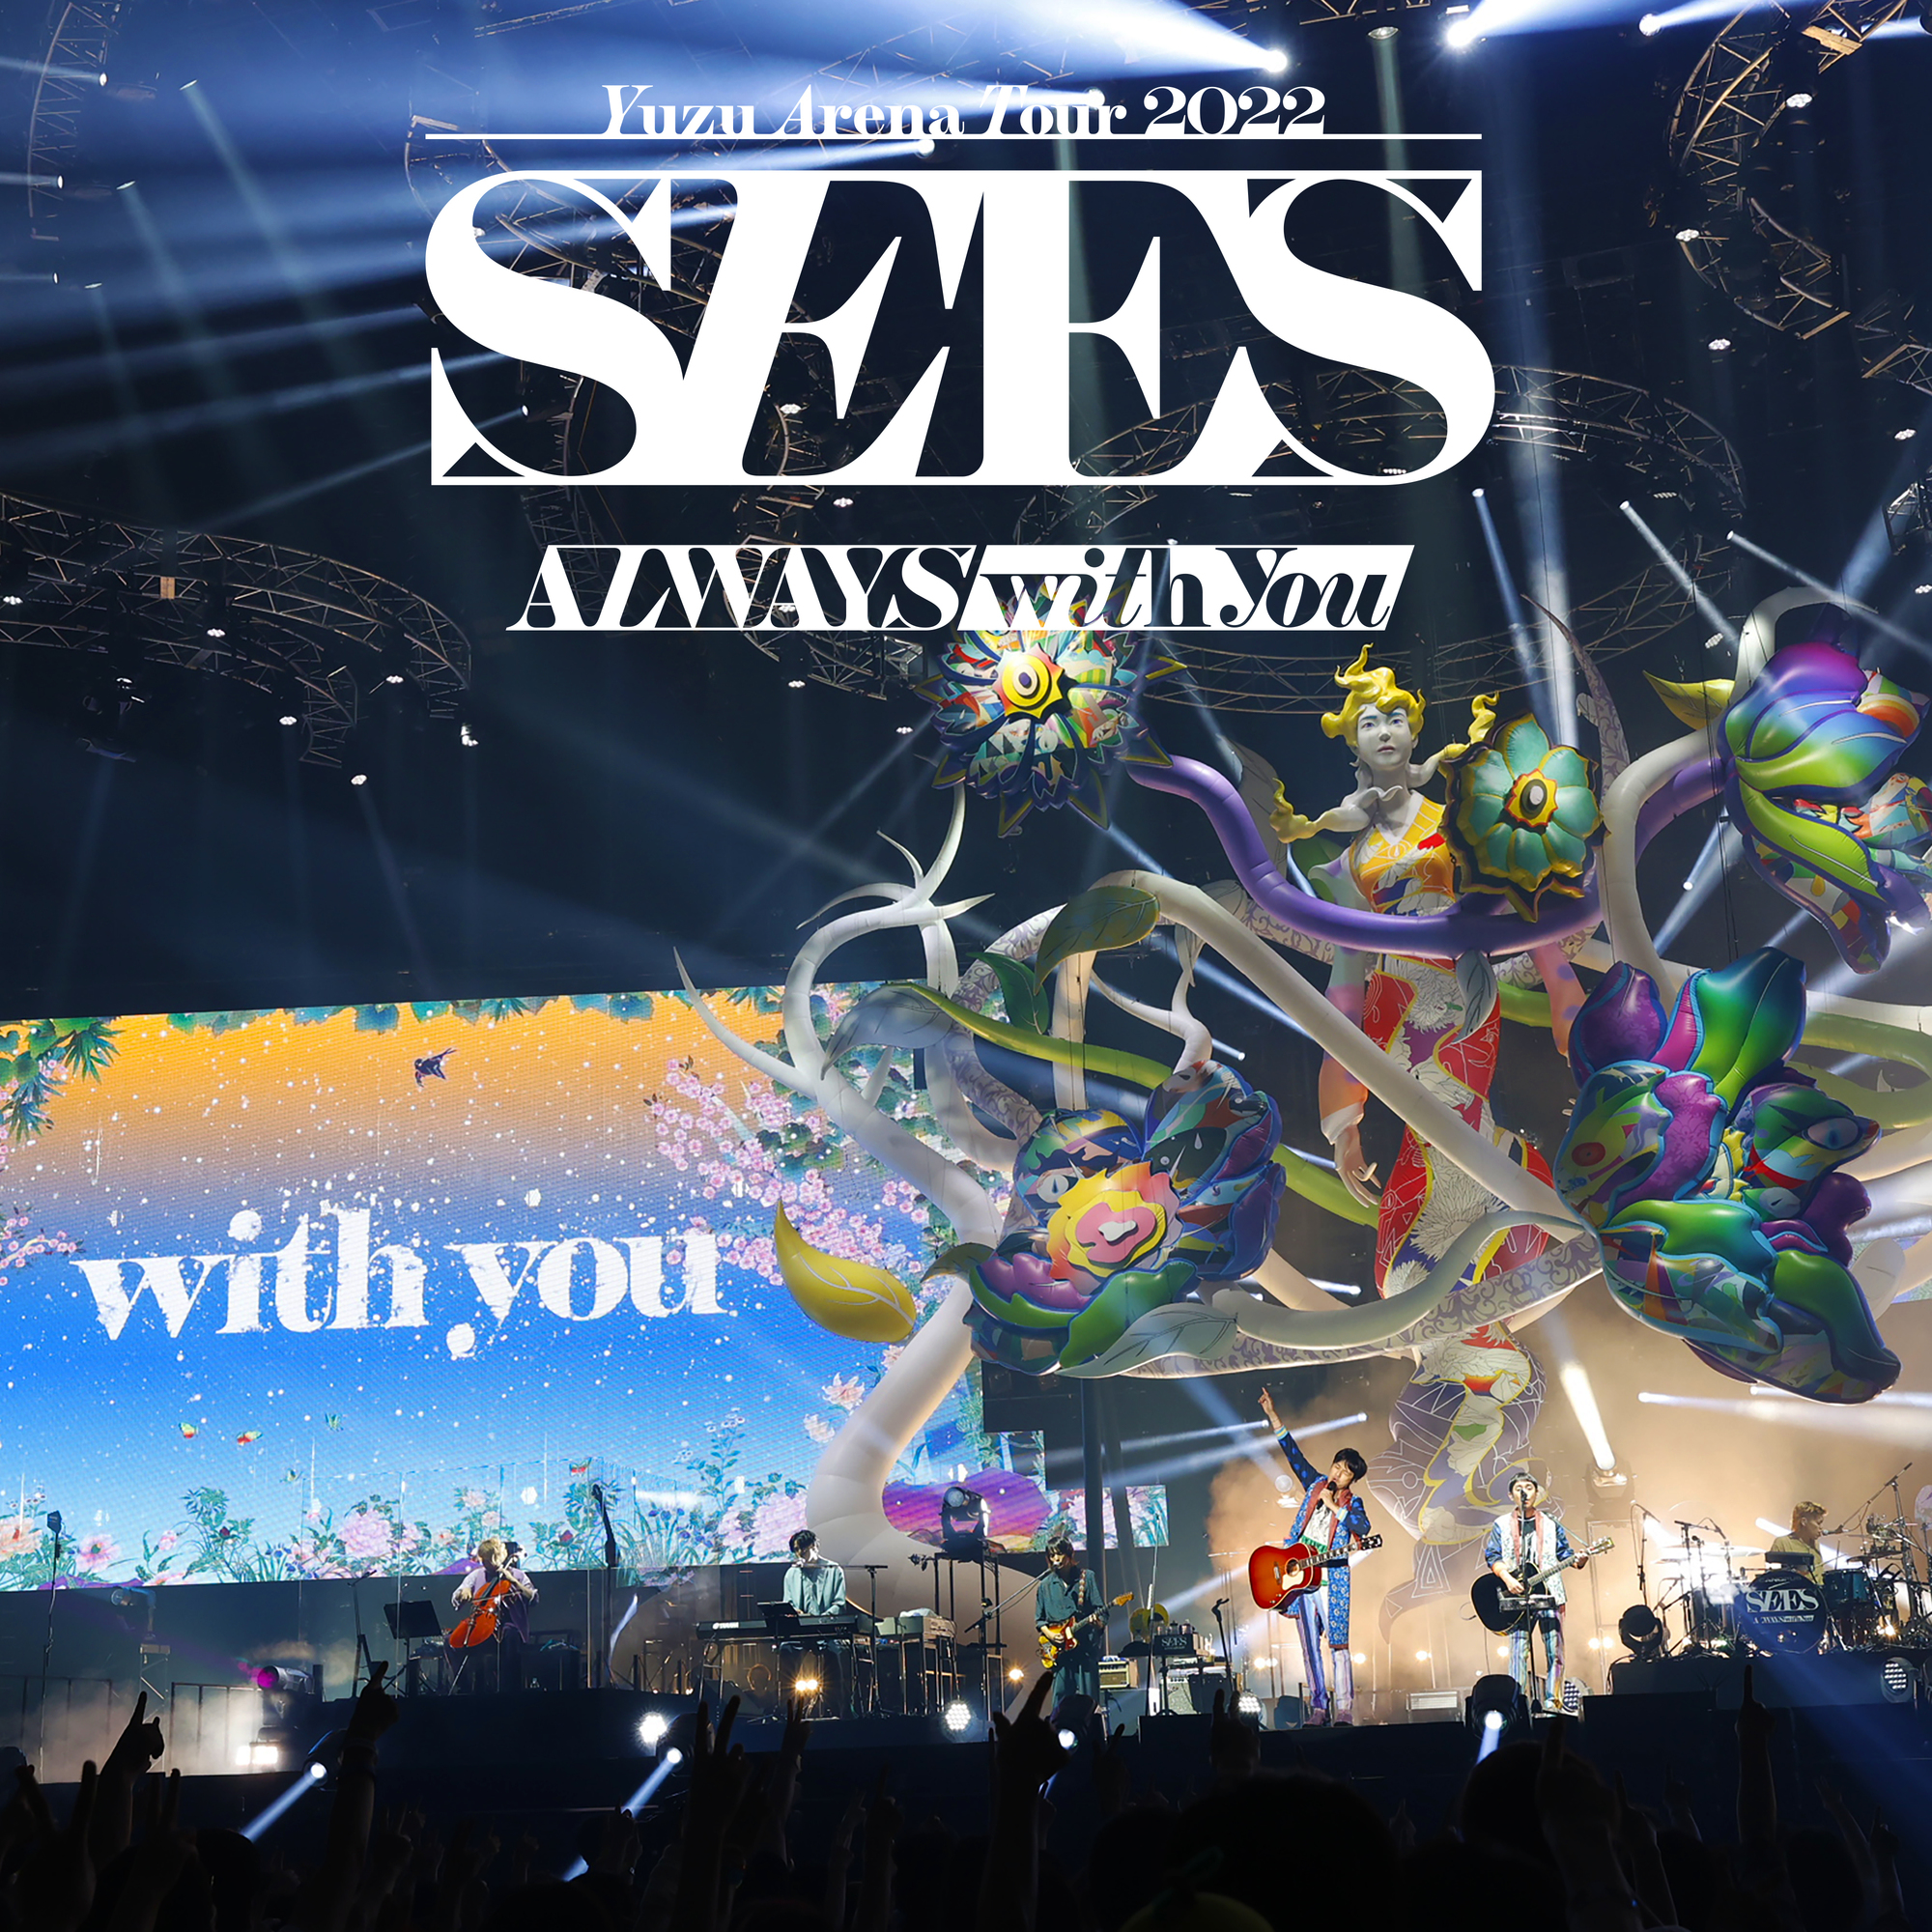 PEOPLE』『SEES』ライブアルバム2か月連続配信限定リリース決定 